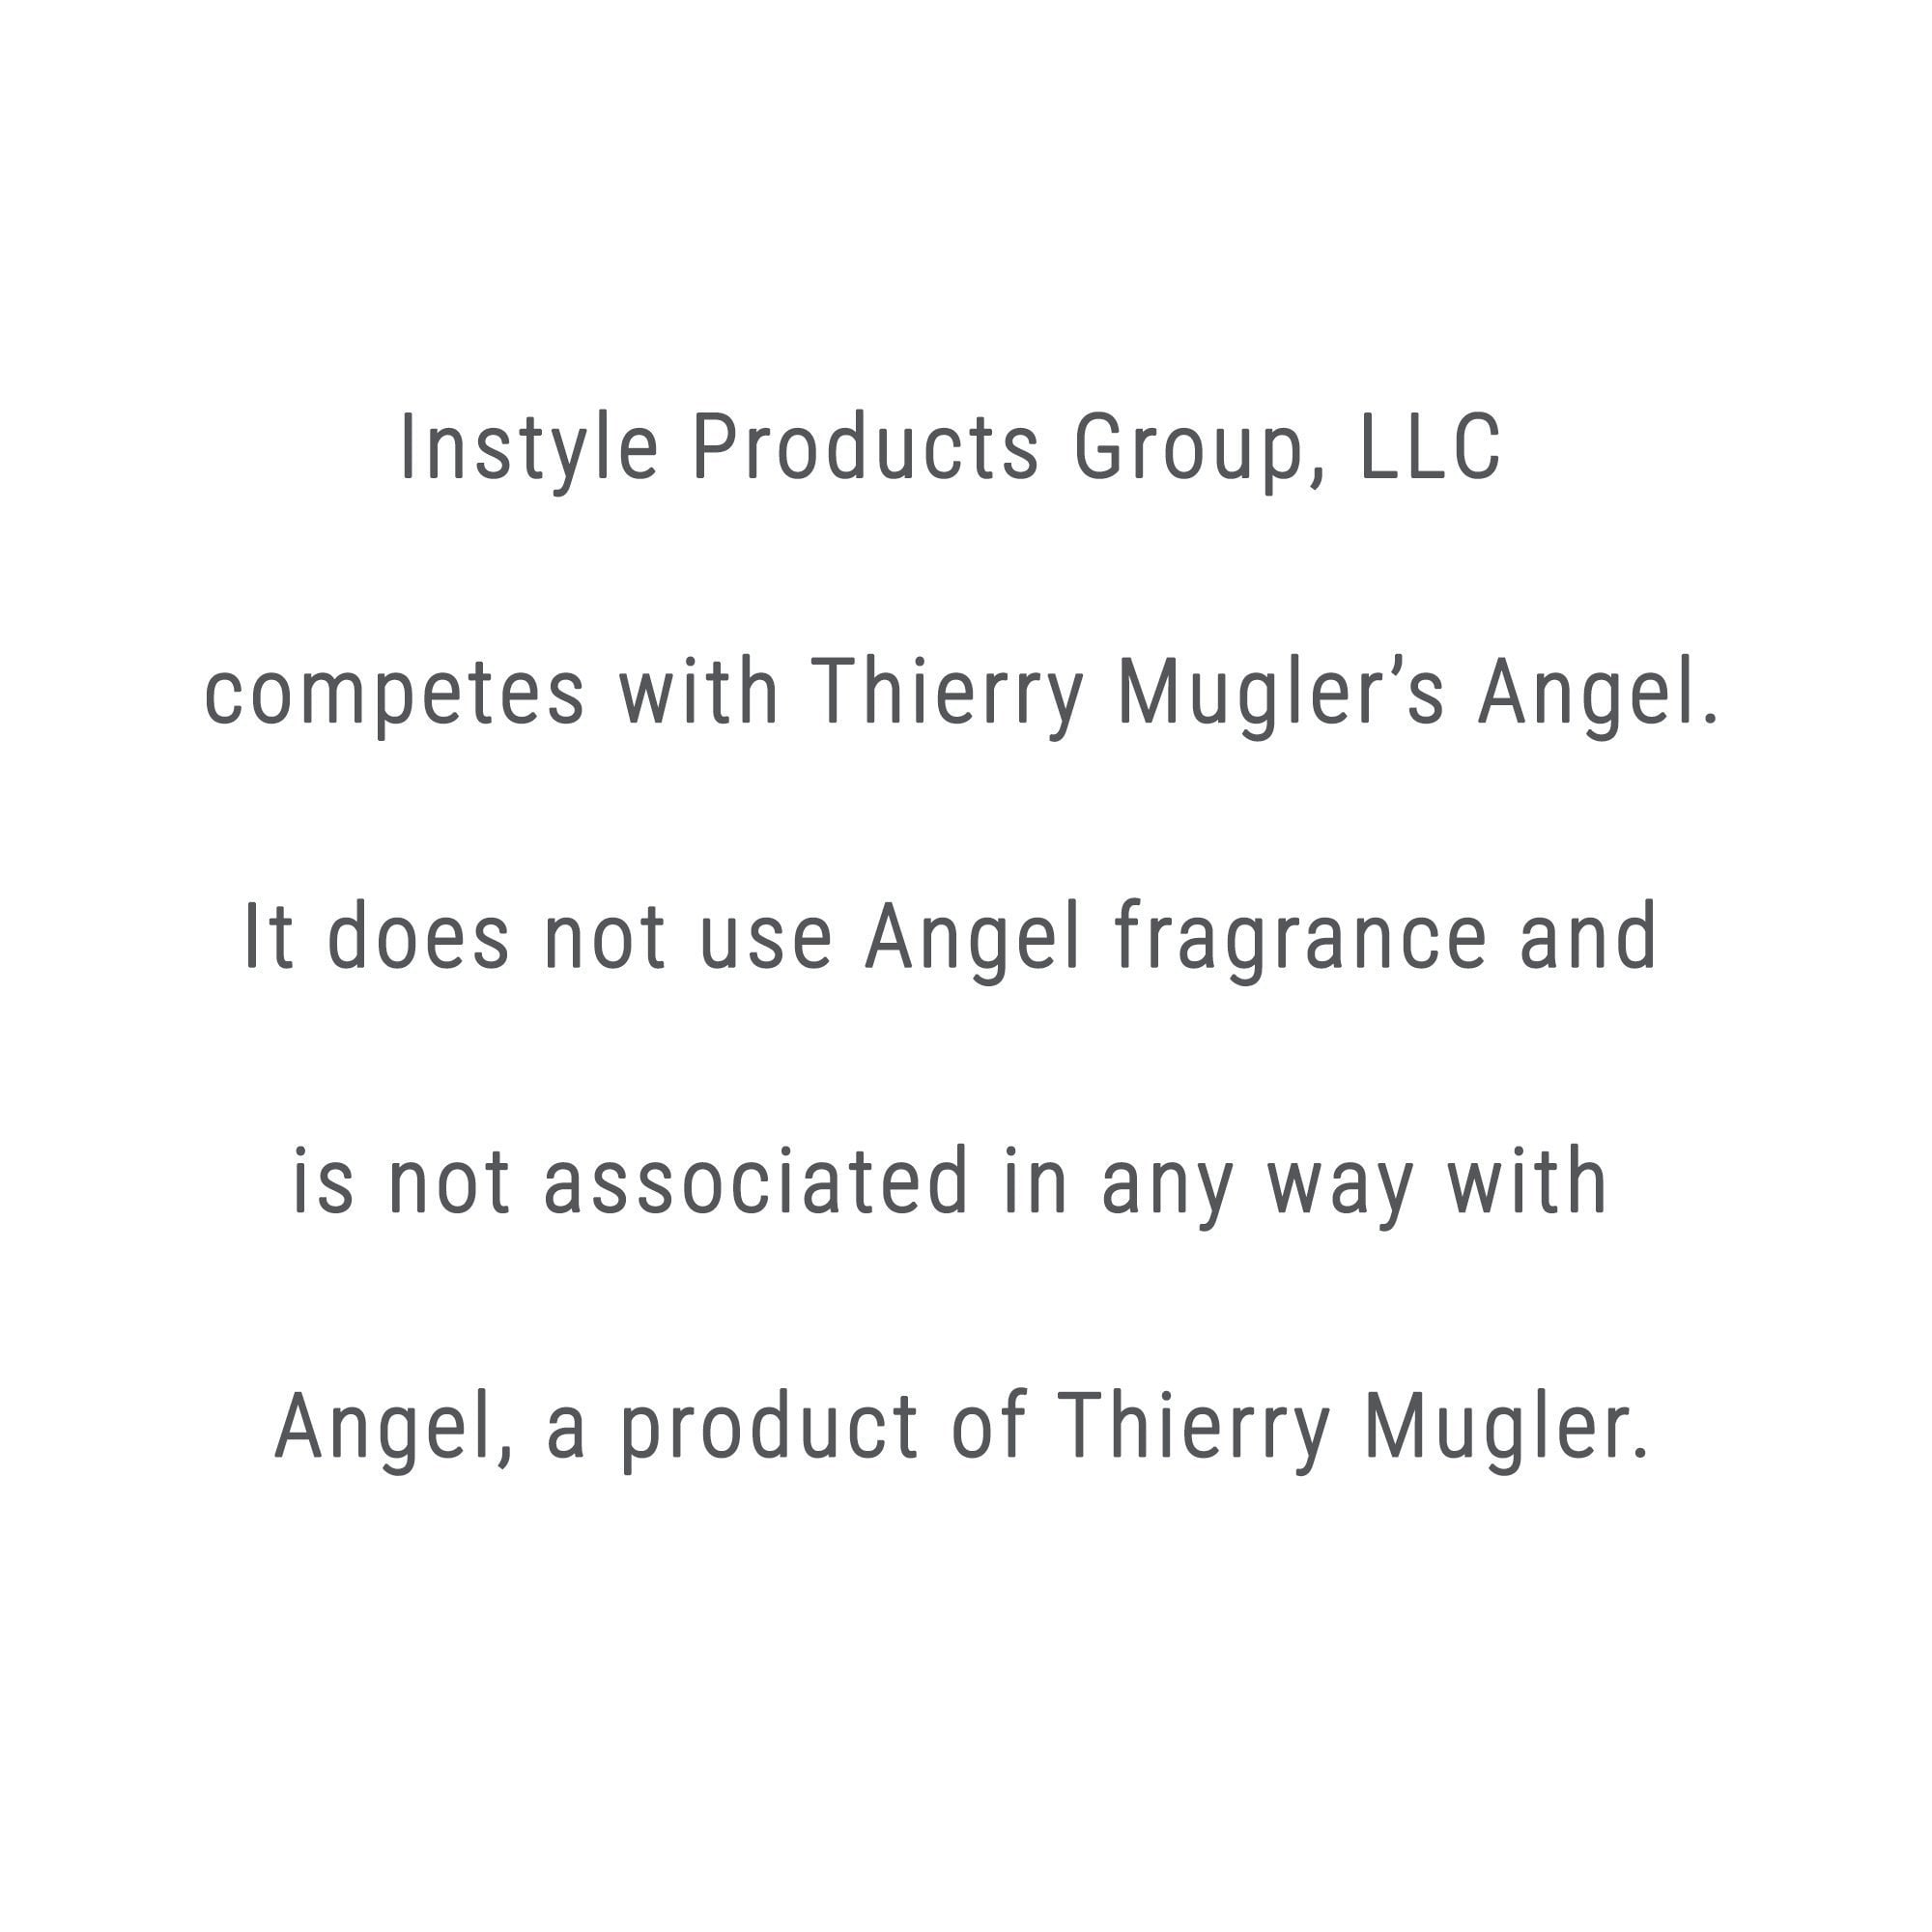 Perfect Scents - Inspired by Thierry Mugler's Angel - Instyle Fragrances